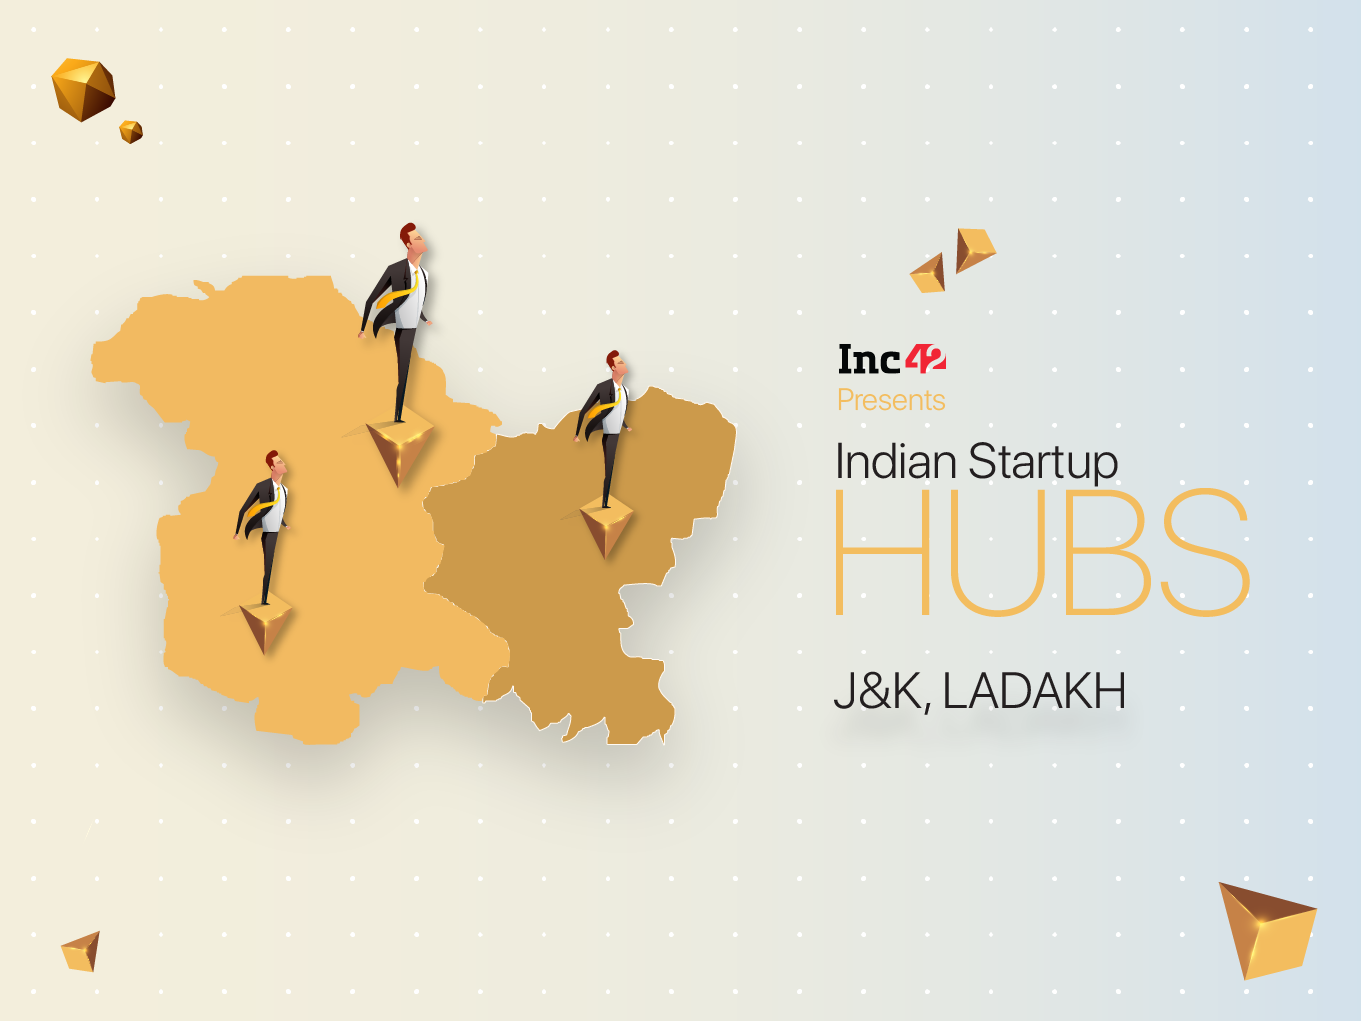 Jammu & Kashmir, Ladakh Startups Fight Back After Internet Issues, Policy Paralysis